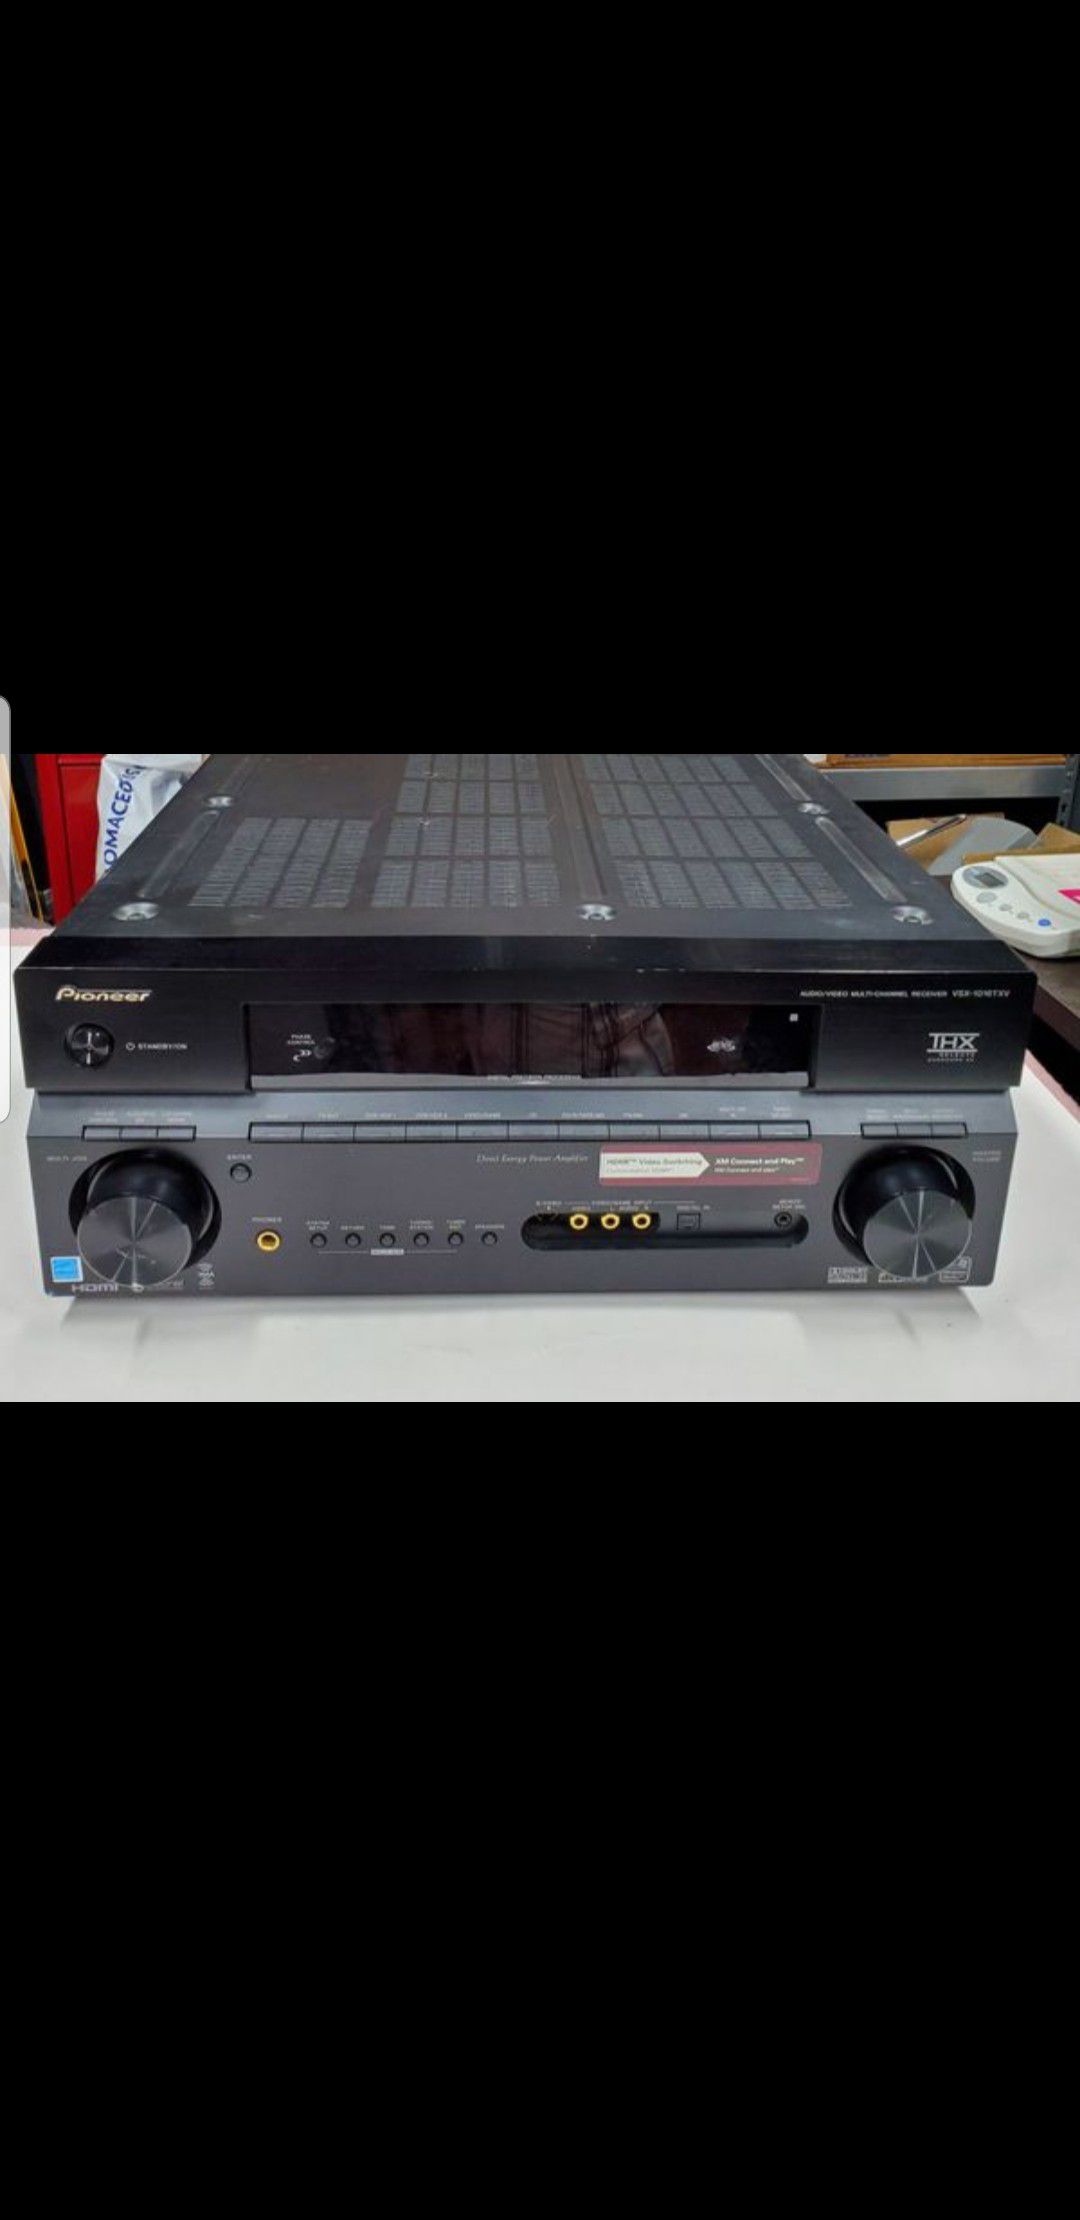 AV Pioneer 7.1 receiver Perfect conditions Remote control Only $120